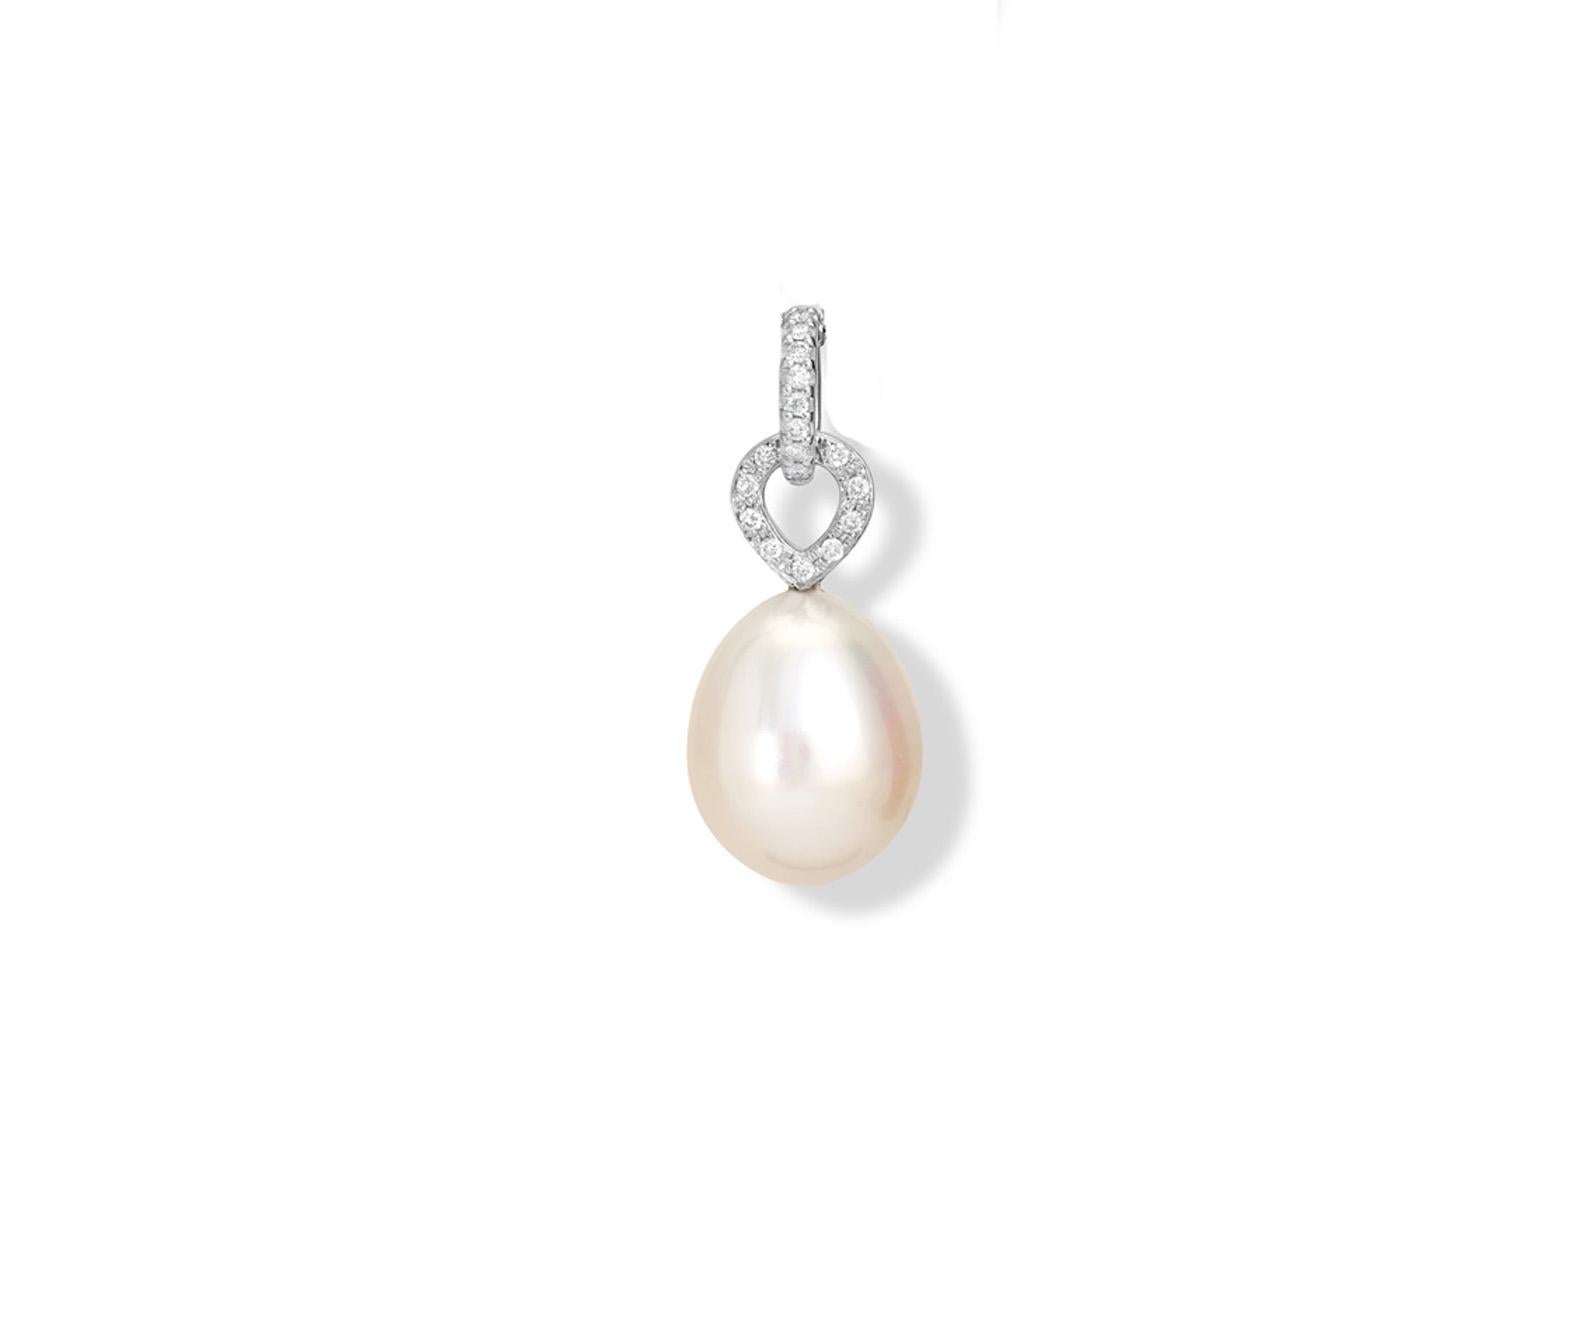 Octavia necklace pendant in 18 karat white gold and pave diamond with a very fine drop shaped freshwater pearl From Cassandra's Classic Collection.

Chains sold separately.